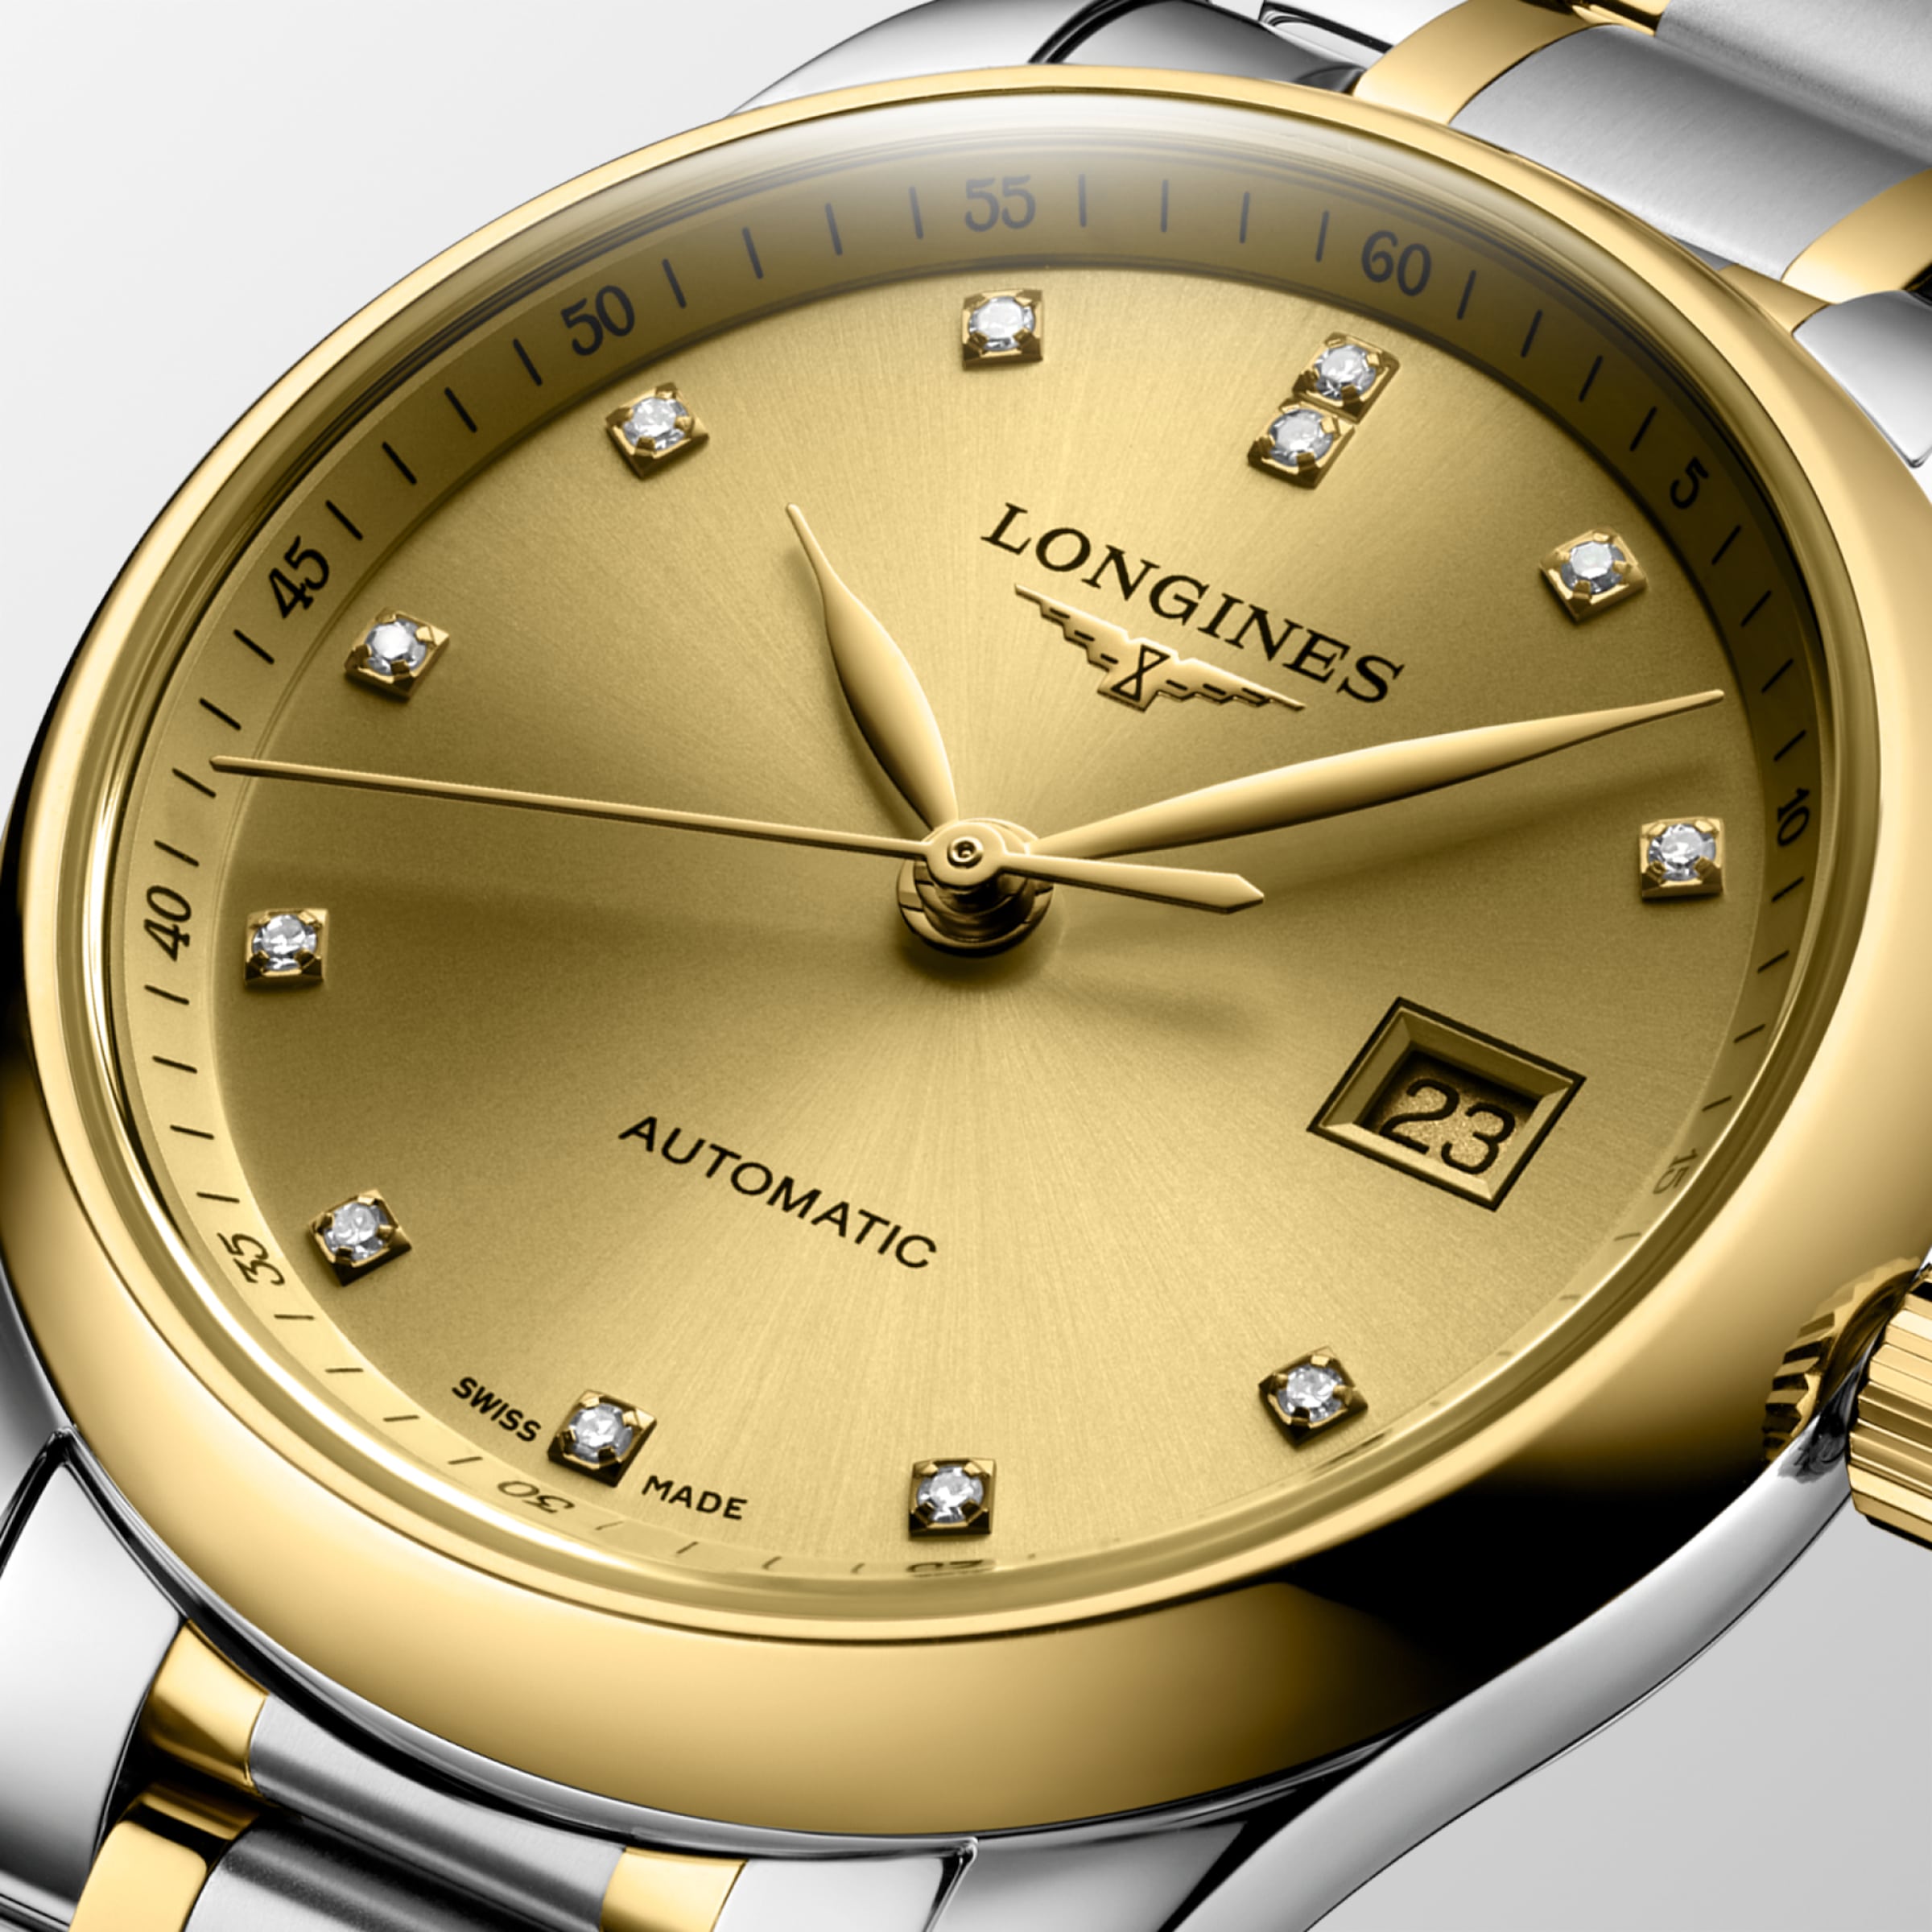 Longines MASTER COLLECTION Automatic Stainless steel and 18 karat yellow gold cap 200 Watch - L2.257.5.37.7